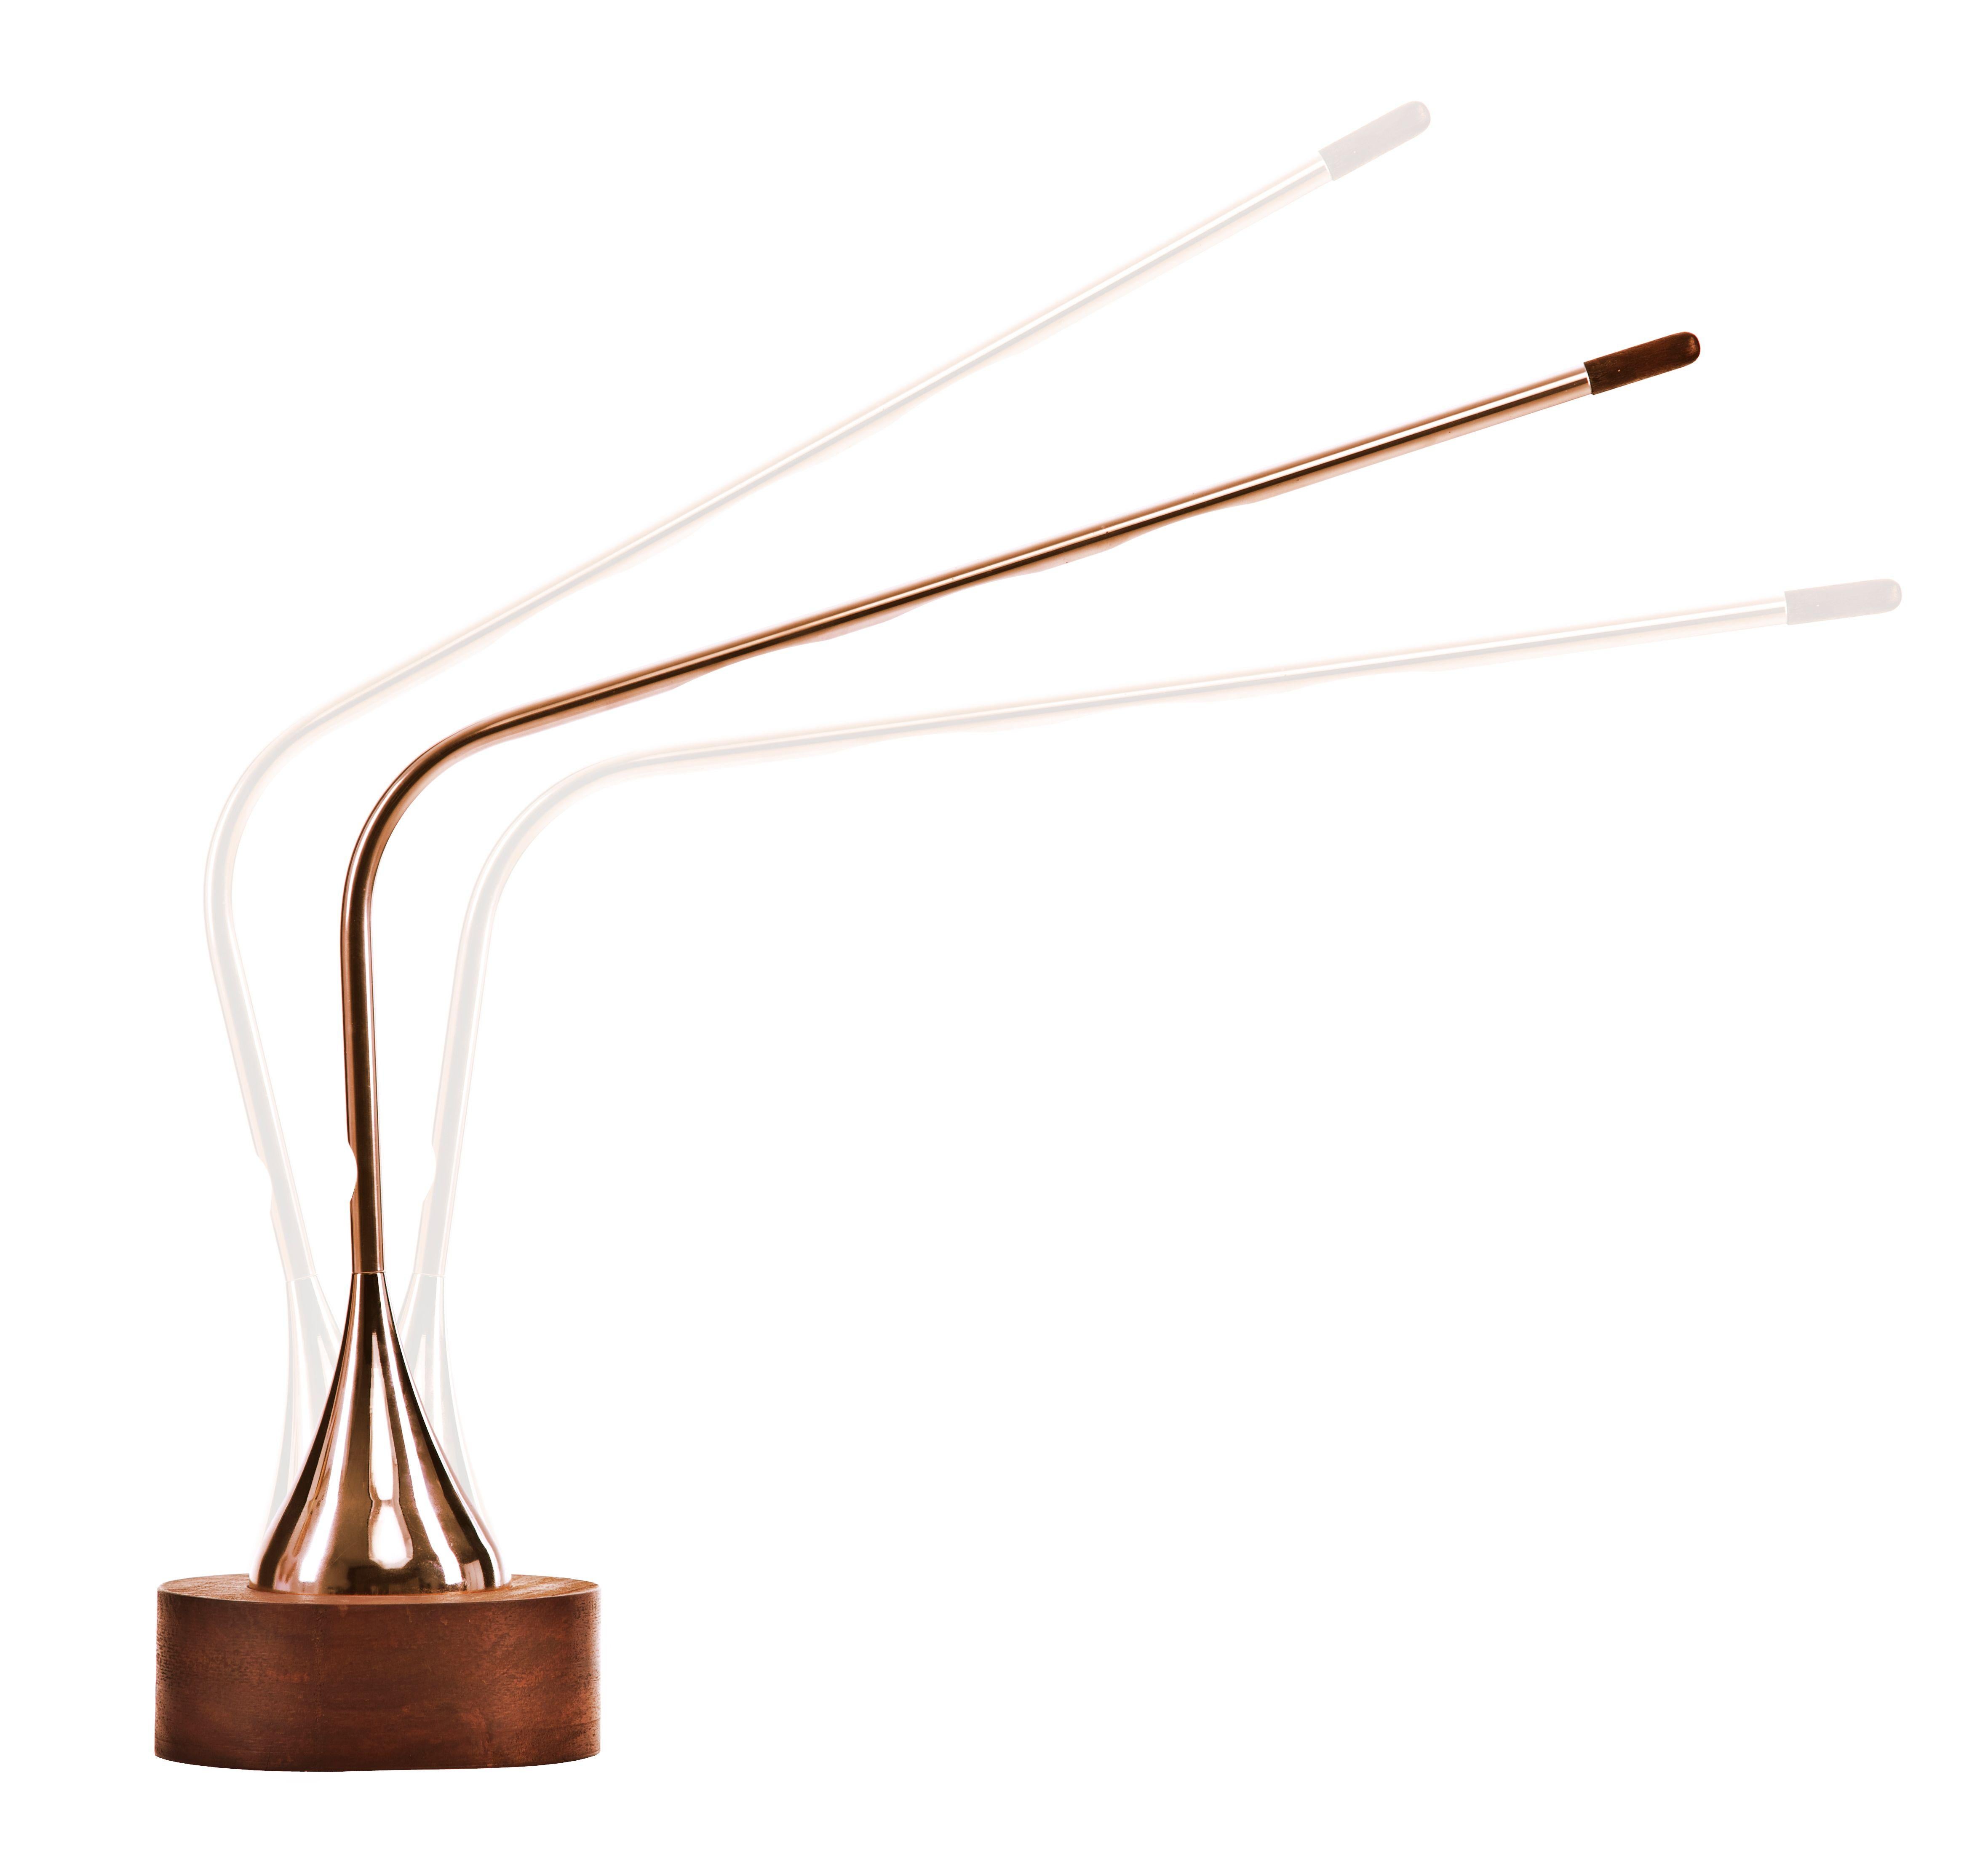 Mortar & Pestle Table Lamp by Egg Designs
Dimensions: 20 L X 20 D X 52 H cm
Materials: Copper Plated Steel, African Mahogany

Founded by South Africans and life partners, Greg and Roche Dry - Egg is a unique perspective in contemporary furniture